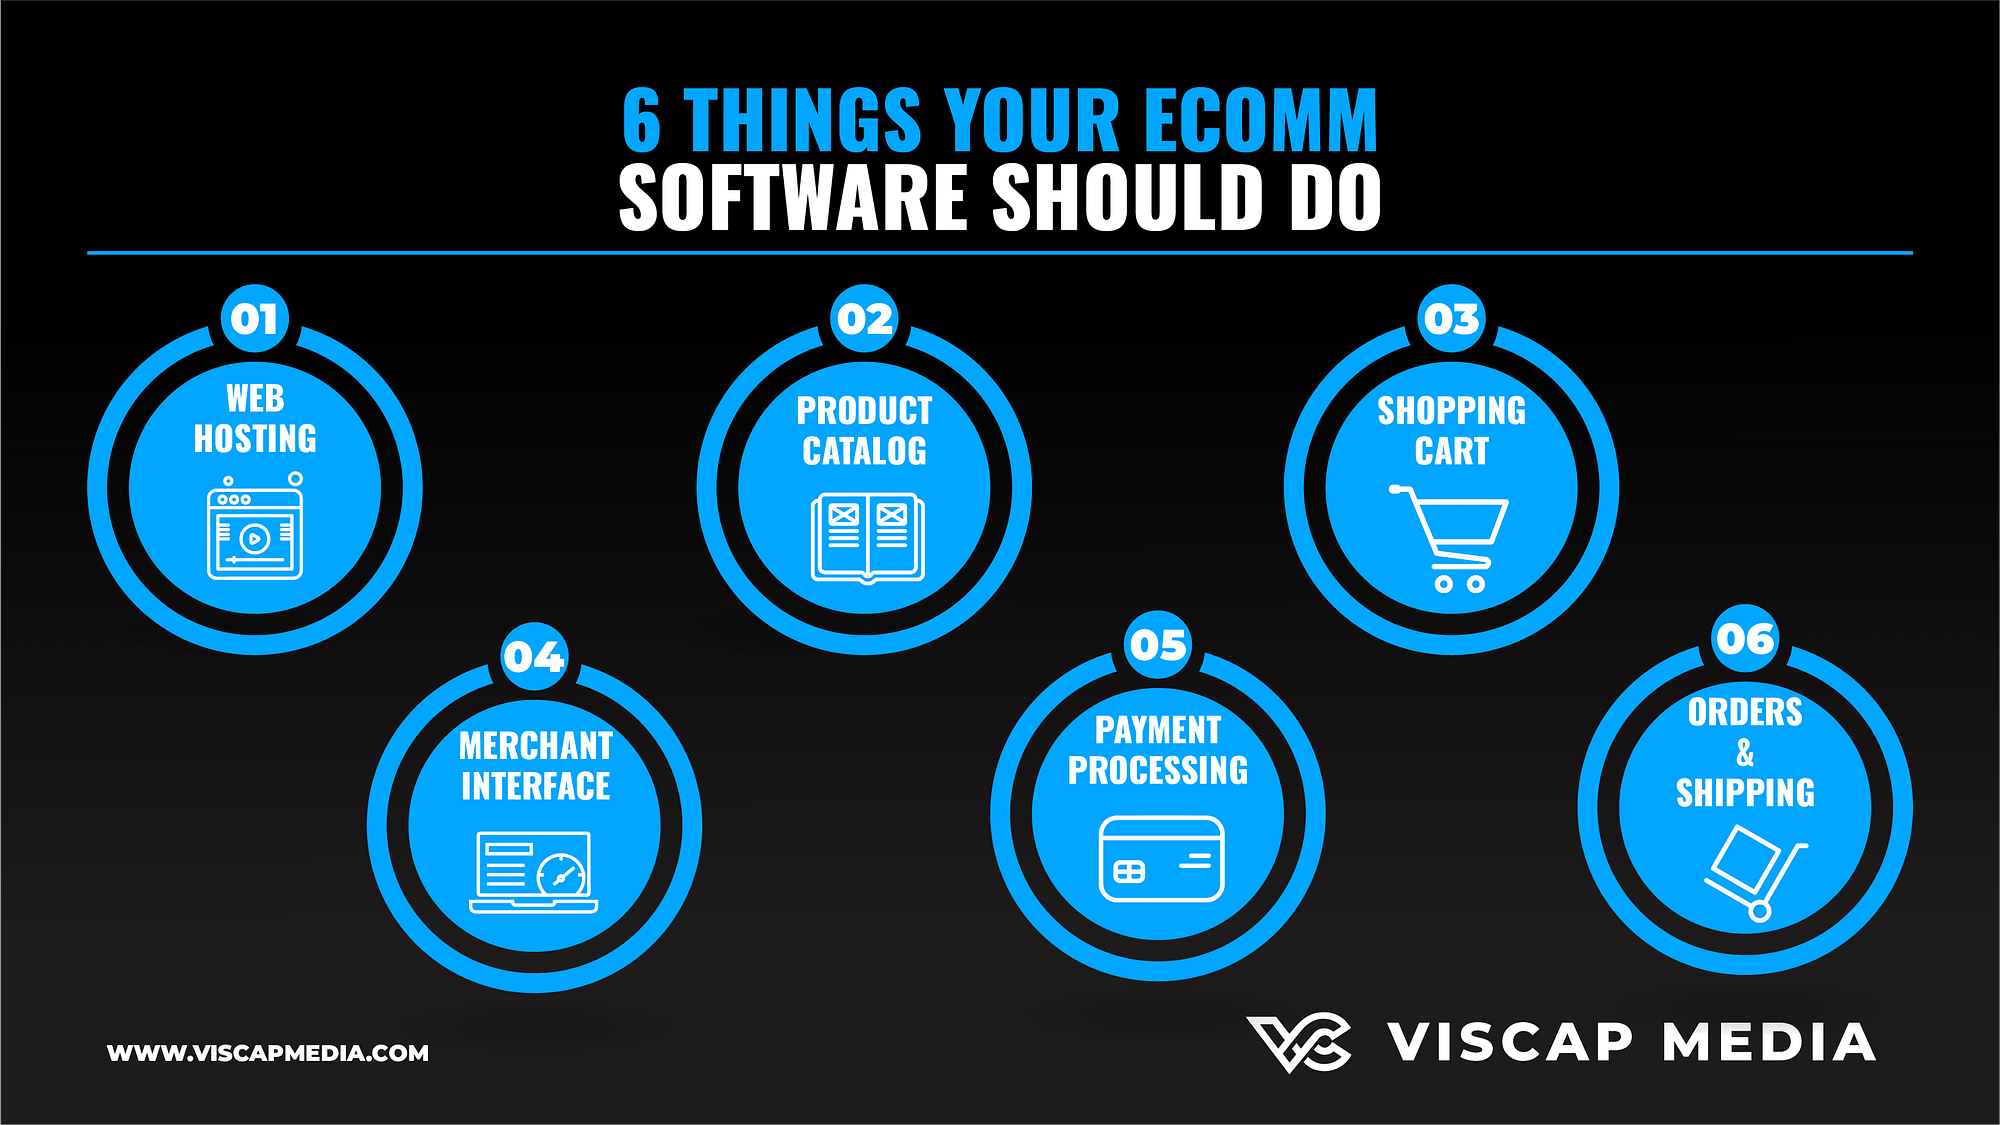 6 Things your eCommerce Software Should Do